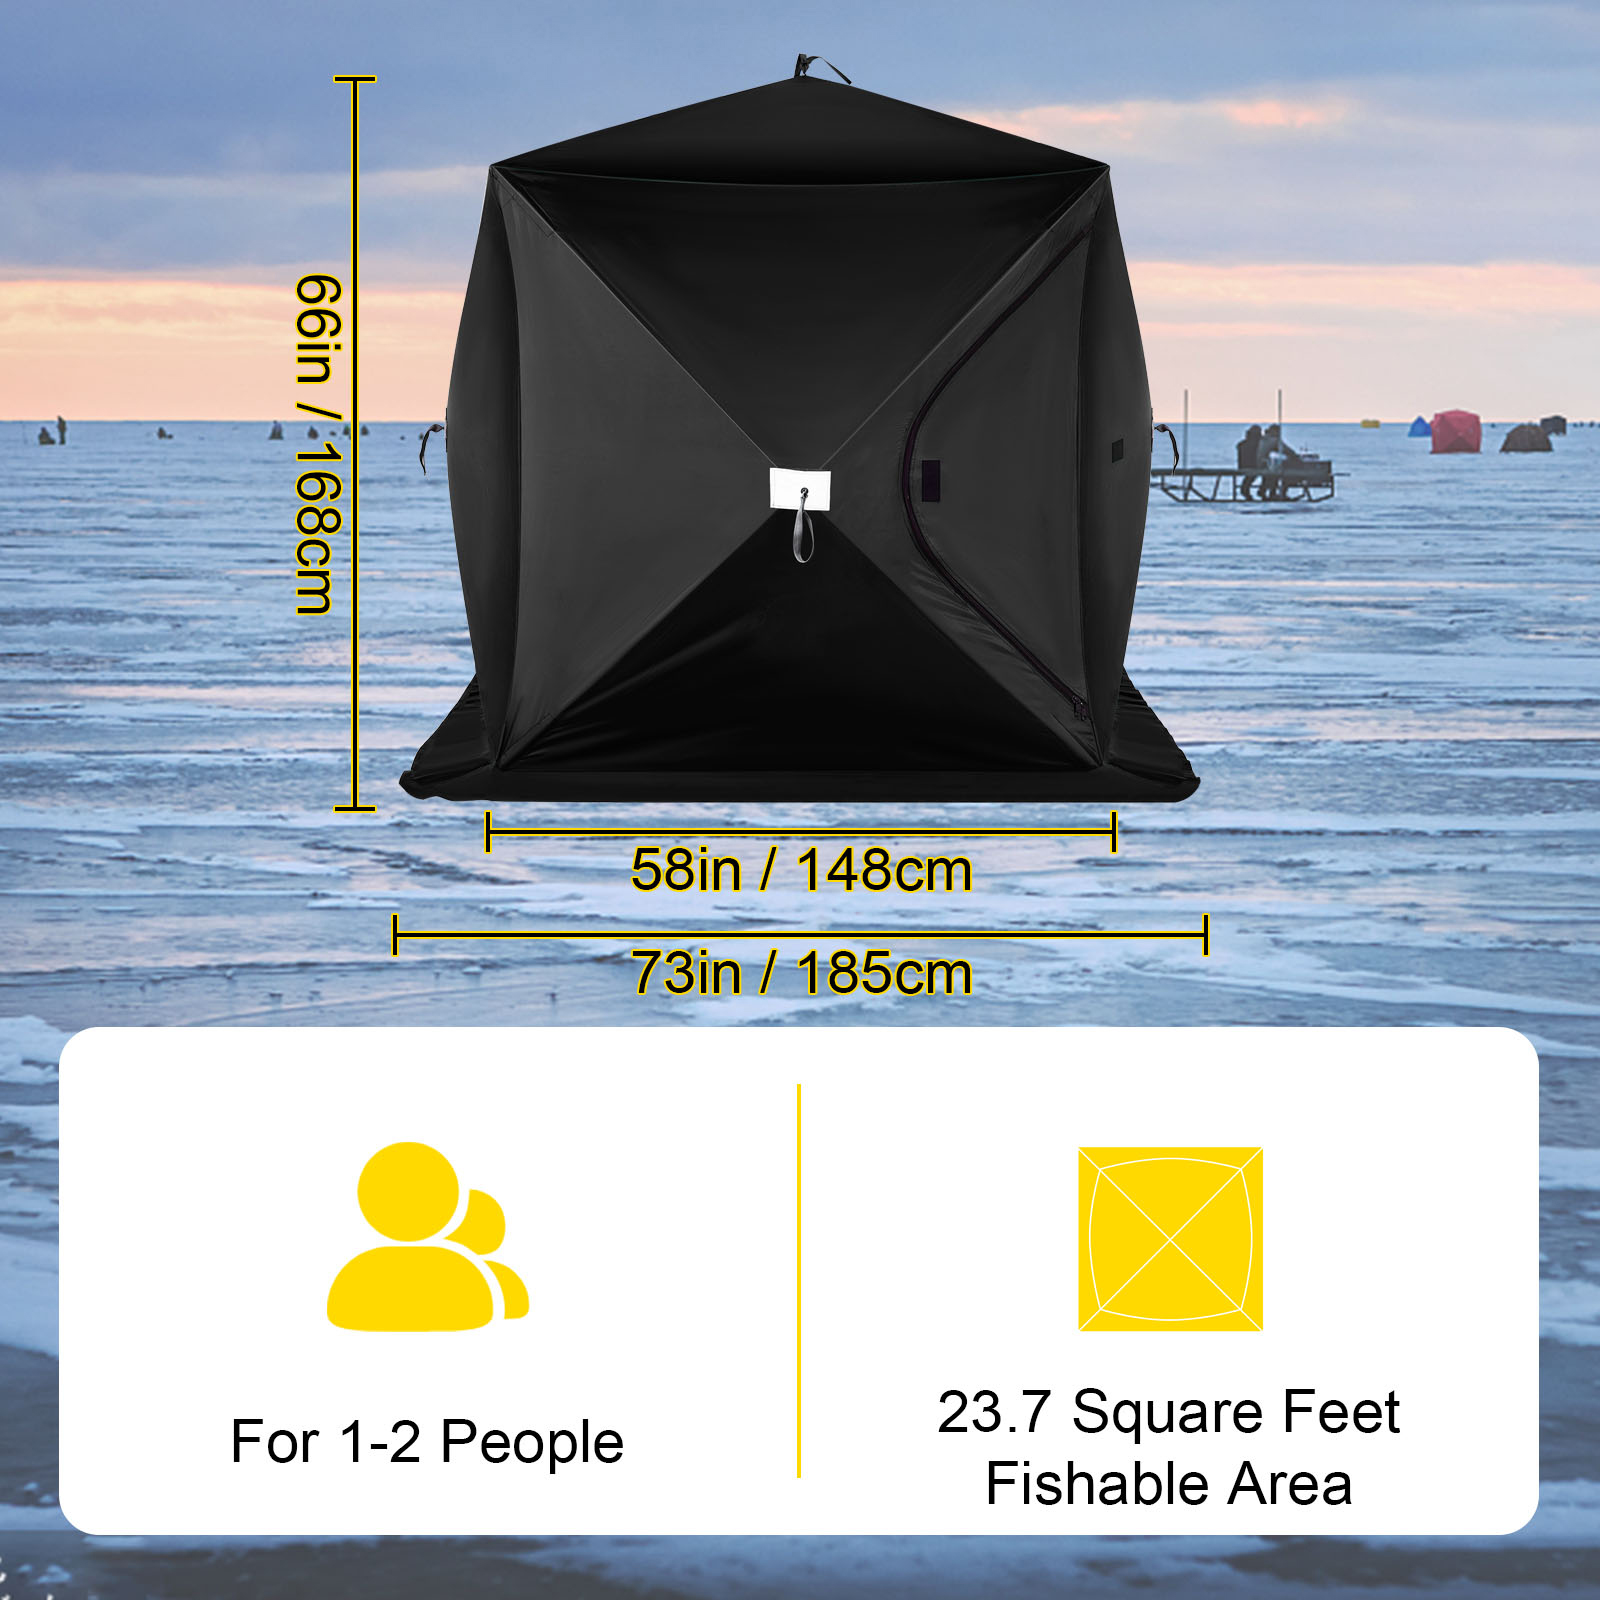 VEVOR 2-3 Person Ice Fishing Shelter, Pop-Up Portable Insulated Ice Fishing  Tent, Waterproof Oxford Fabric